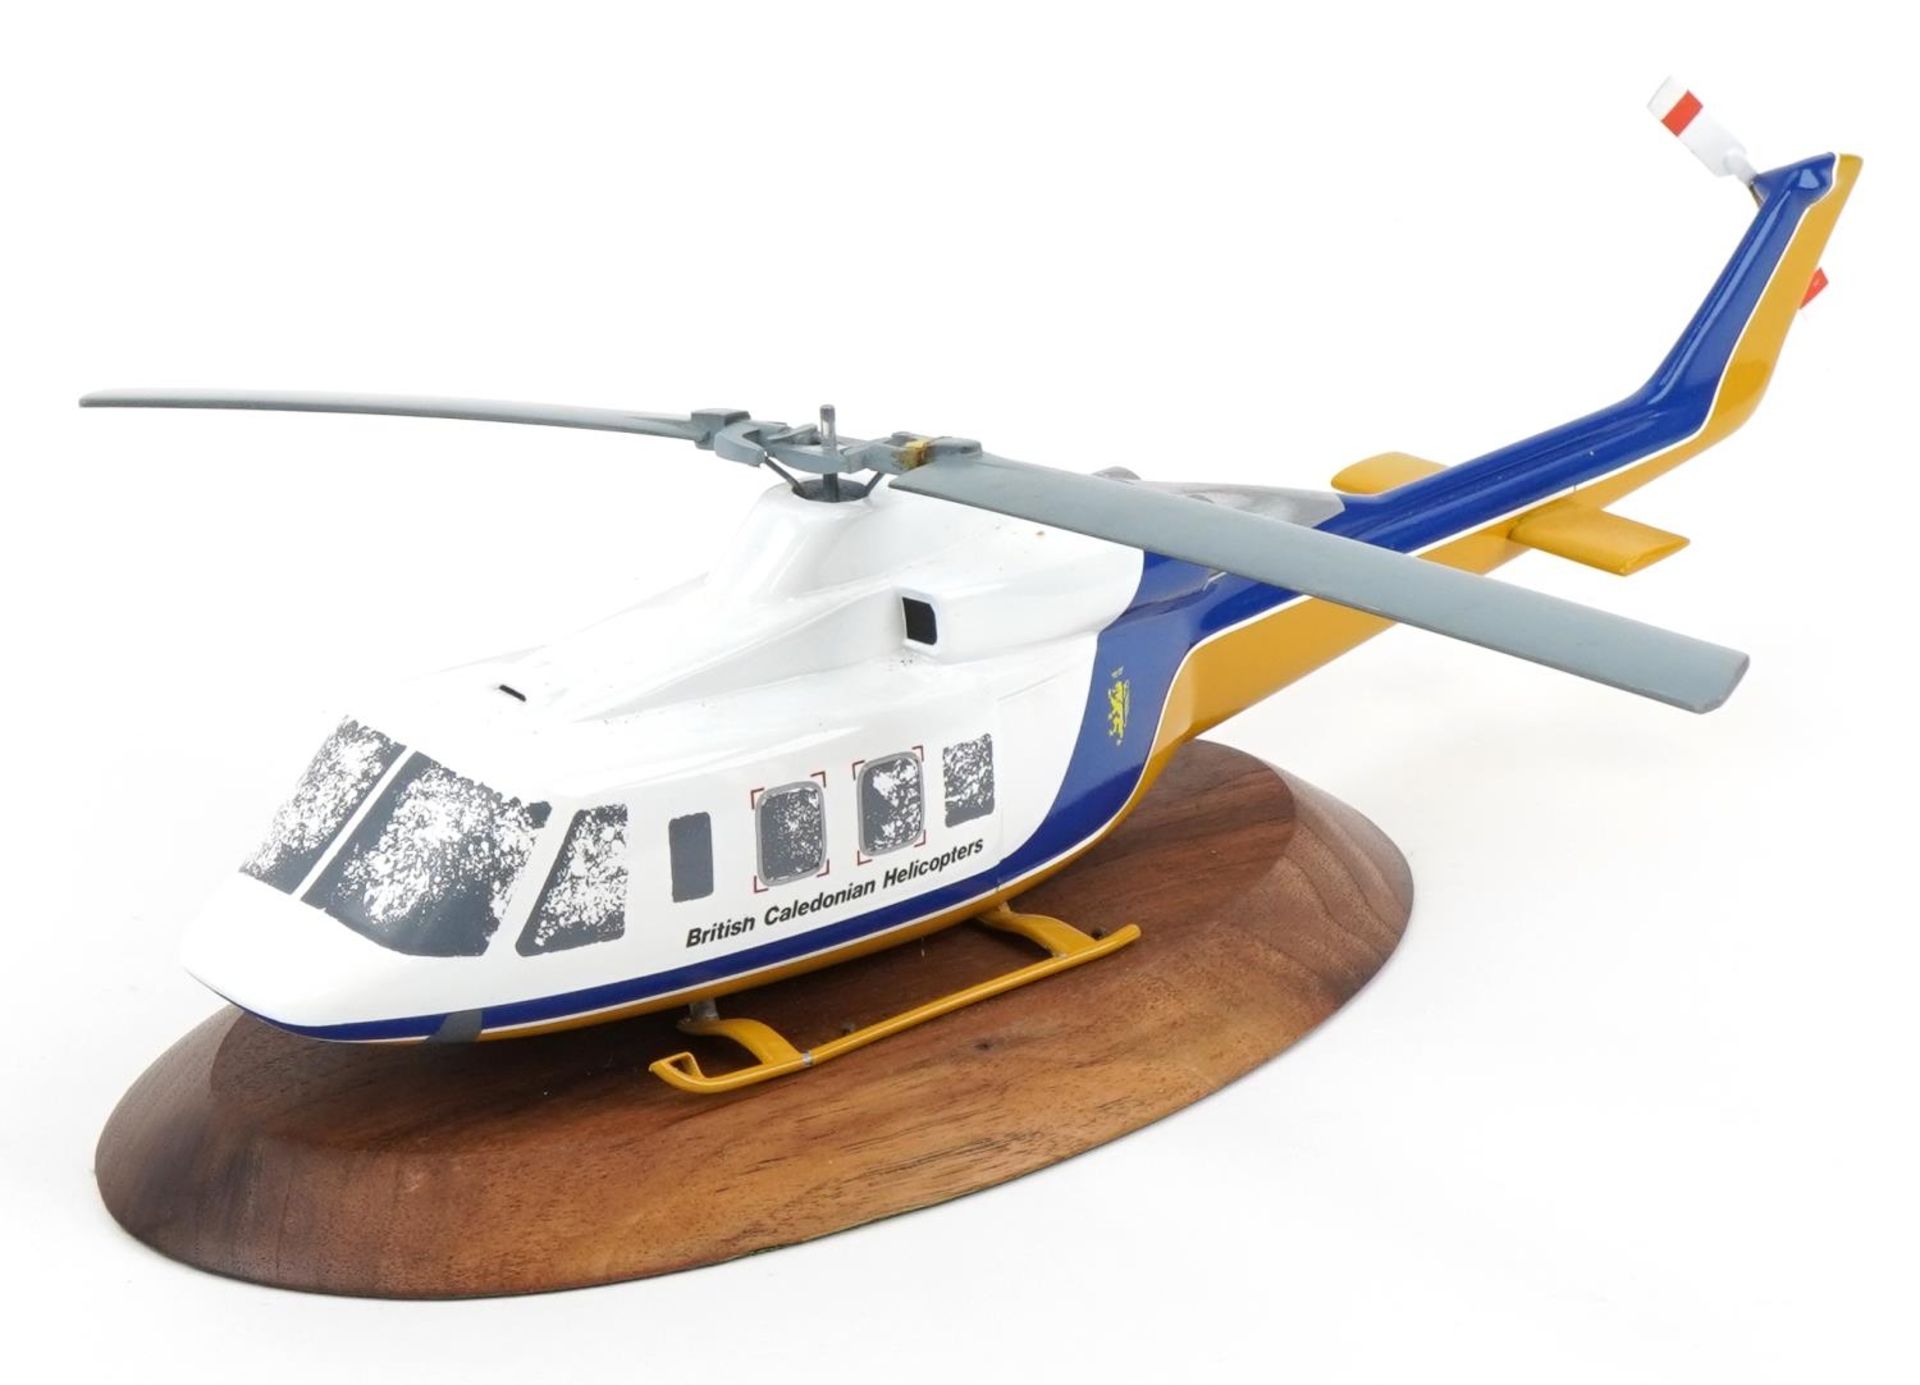 Aviation interest 1:30 scale British Caledonian Bell 2145T helicopter, 50cm in length : For